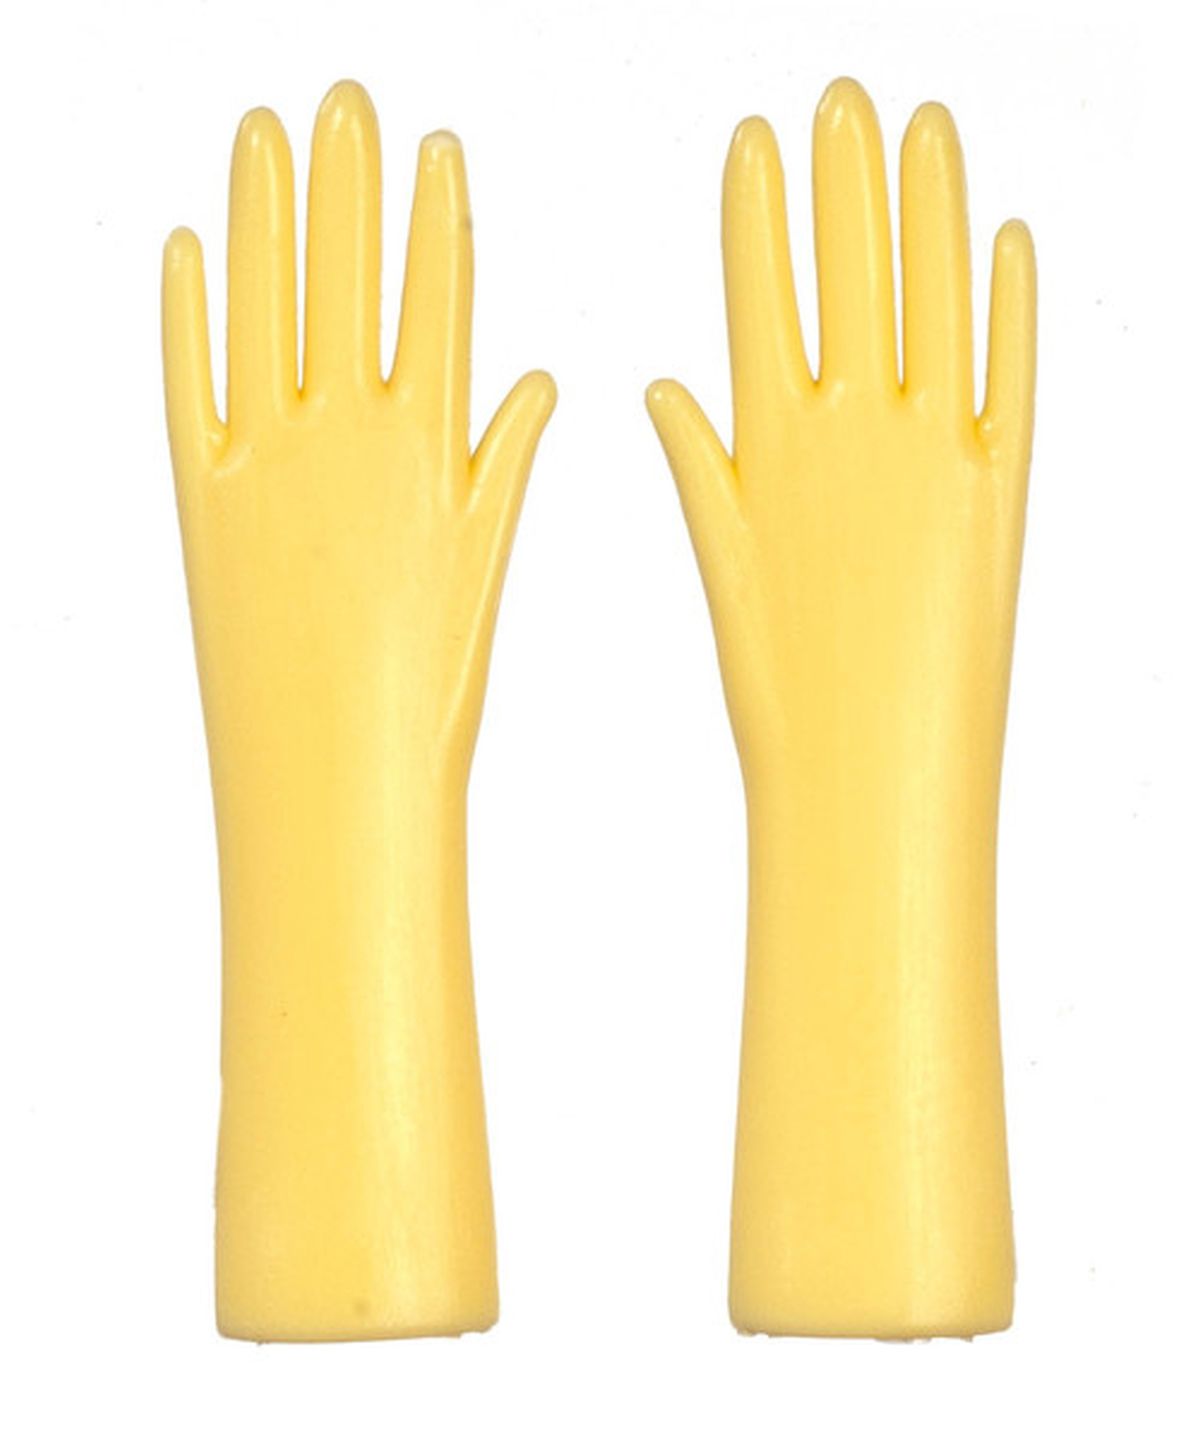 Yellow Rubber Gloves by International Miniatures